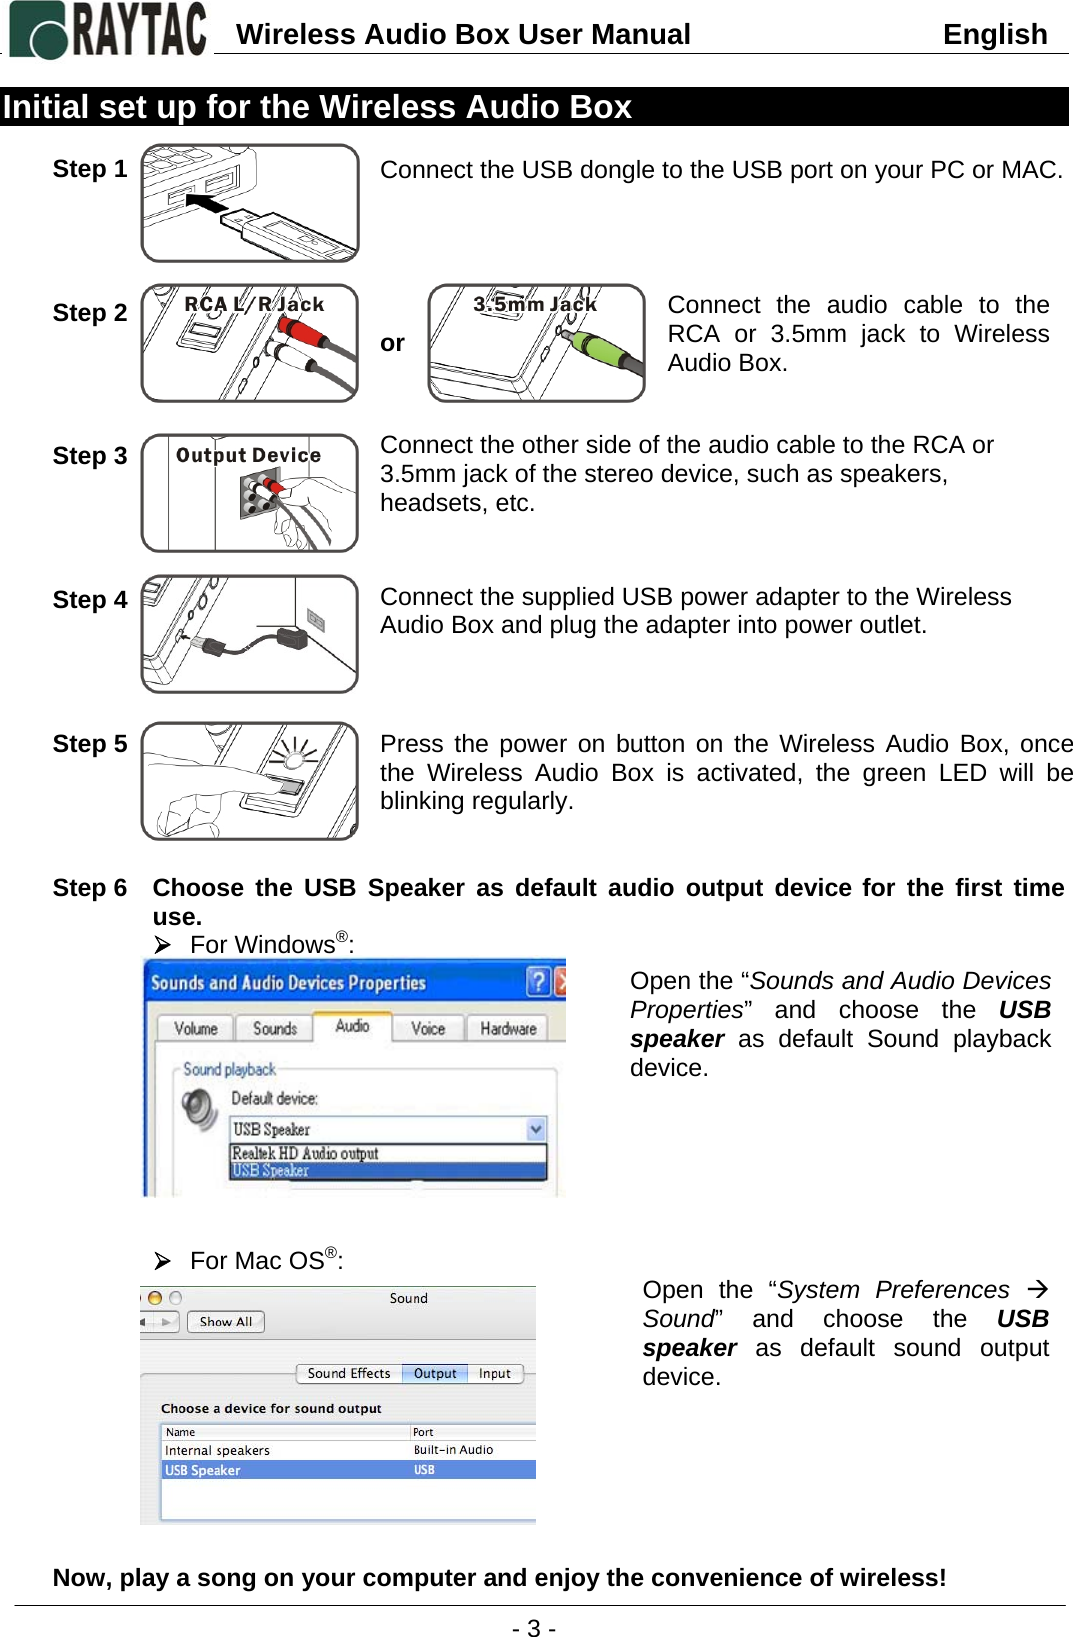 Wireless Audio Box User Manual                               English    - 3 -  Initial set up for the Wireless Audio Box  Step 1        Step 2         Step 3          Step 4            Step 5          Step 6  Choose the USB Speaker as default audio output device for the first time use. ¾ For Windows®:            ¾ For Mac OS®:           Now, play a song on your computer and enjoy the convenience of wireless! Connect the USB dongle to the USB port on your PC or MAC. Connect the audio cable to the RCA or 3.5mm jack to Wireless Audio Box.  Connect the supplied USB power adapter to the Wireless Audio Box and plug the adapter into power outlet. or Connect the other side of the audio cable to the RCA or 3.5mm jack of the stereo device, such as speakers, headsets, etc. Press the power on button on the Wireless Audio Box, once the Wireless Audio Box is activated, the green LED will be blinking regularly.  Open the “Sounds and Audio Devices Properties” and choose the USB speaker as default Sound playback device. Open the “System Preferences Æ Sound” and choose the USB speaker as default sound output device. 